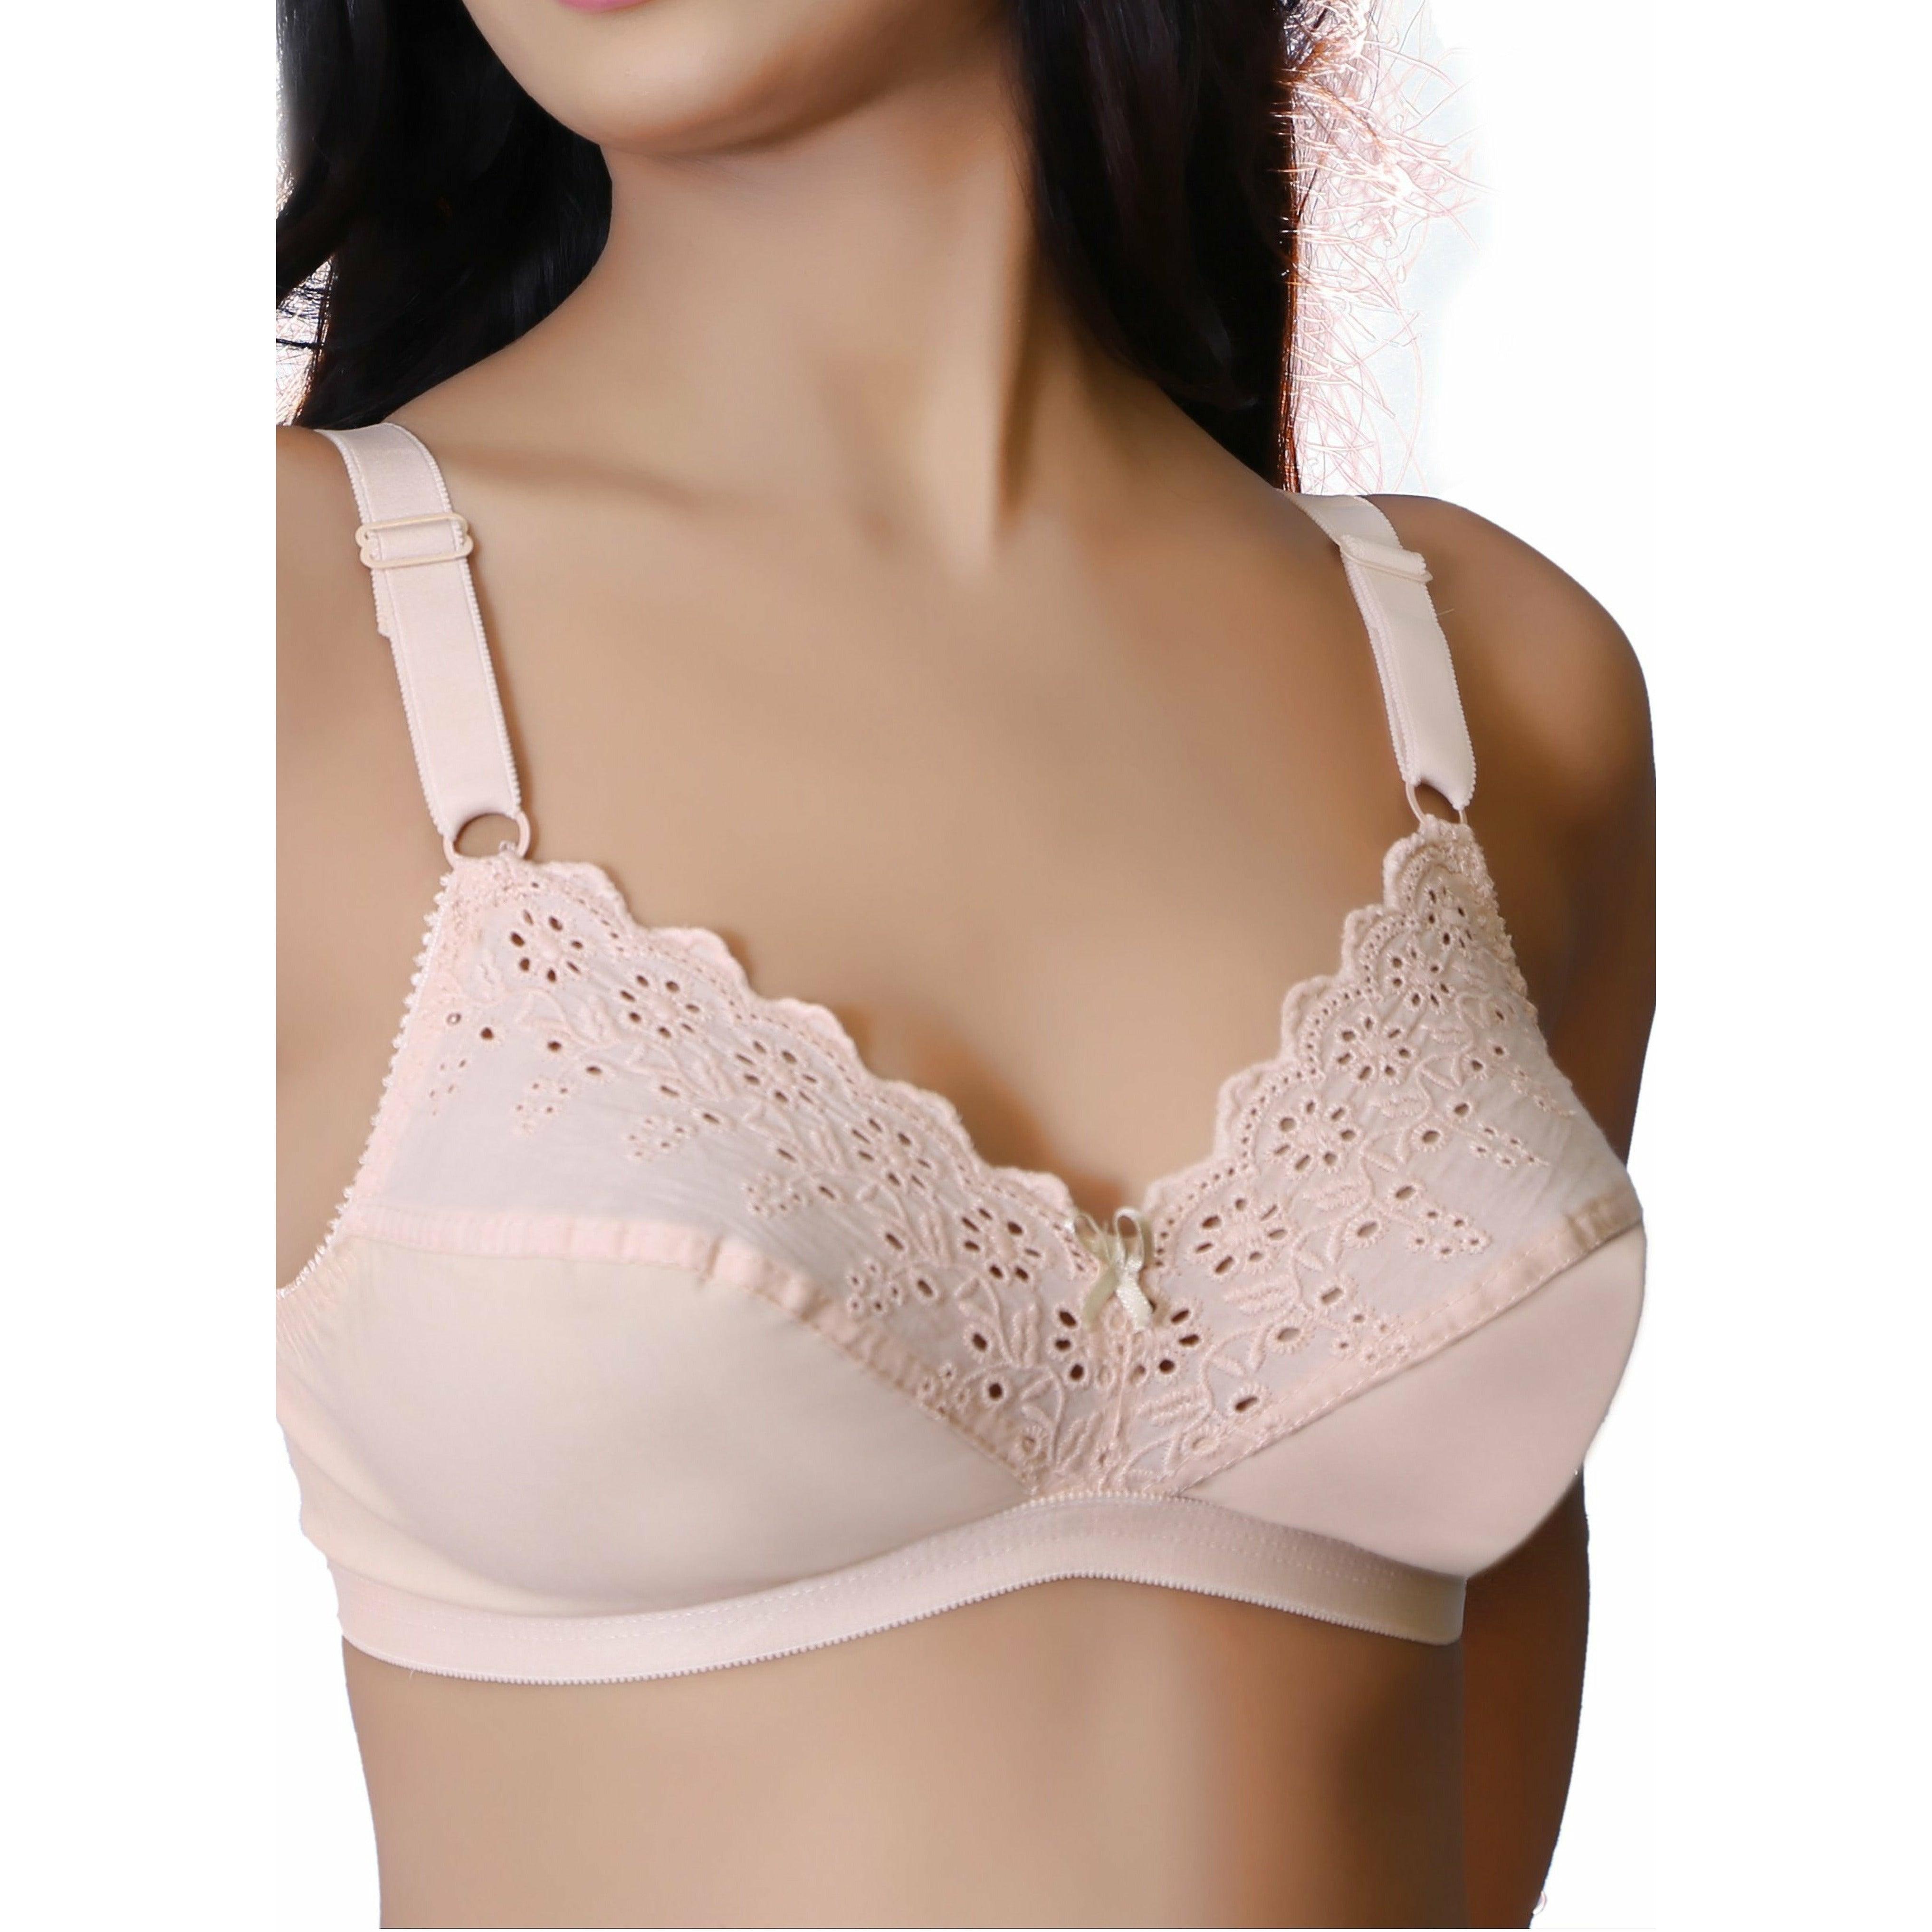 Skin Queen's Cup - Breathable Non-Padded Wirefree Cotton Bra